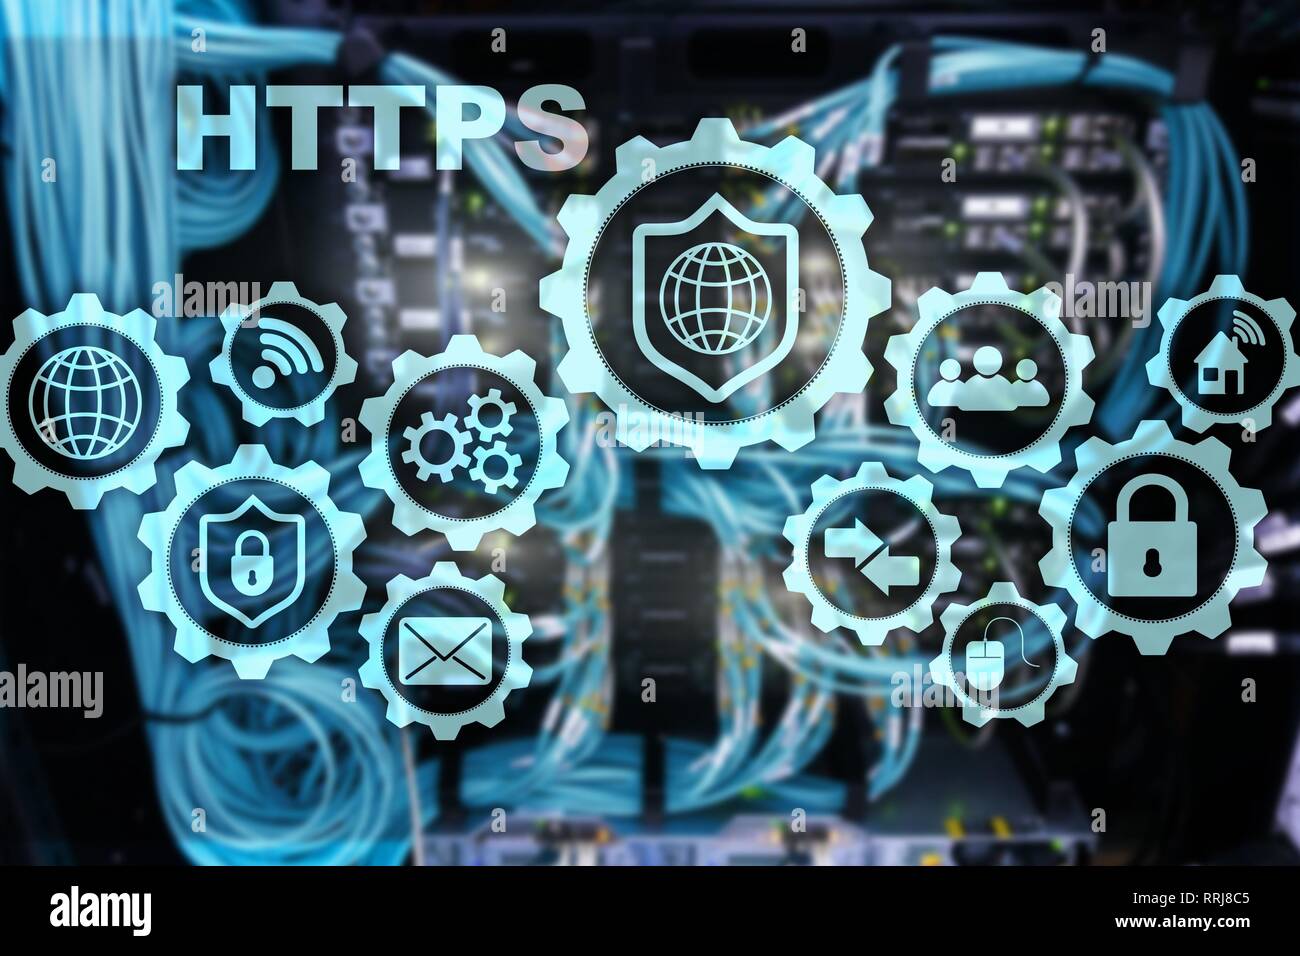 HTTPS. Hypertext Transport Protocol Secure. Technology Concept on Server Room Background. Virtual Icon for network security web service. Stock Photo